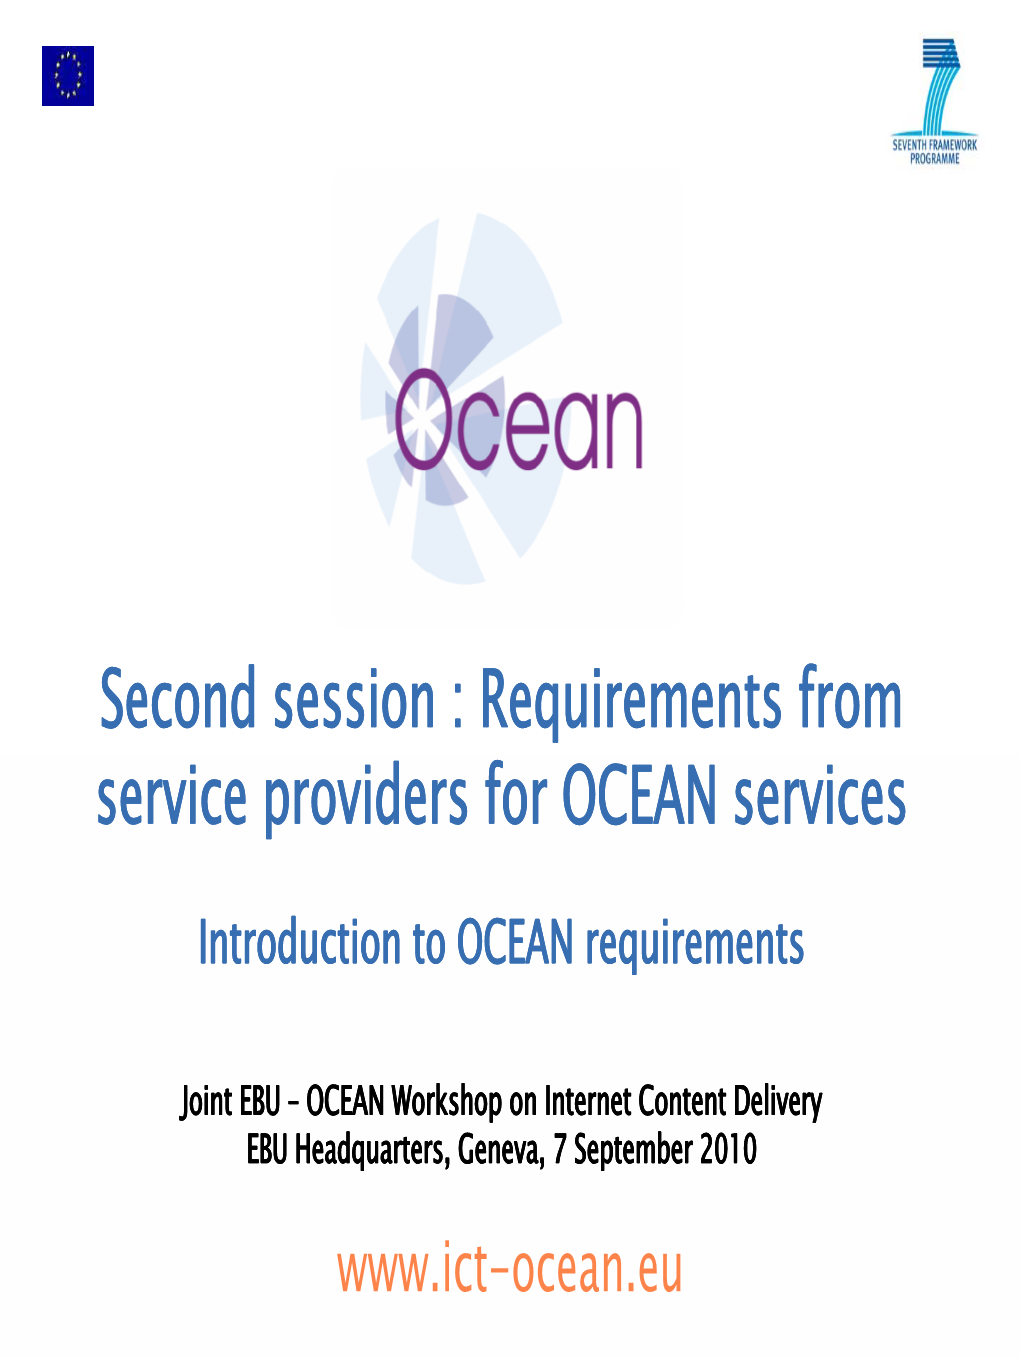 Requirements from Service Providers for OCEAN Services